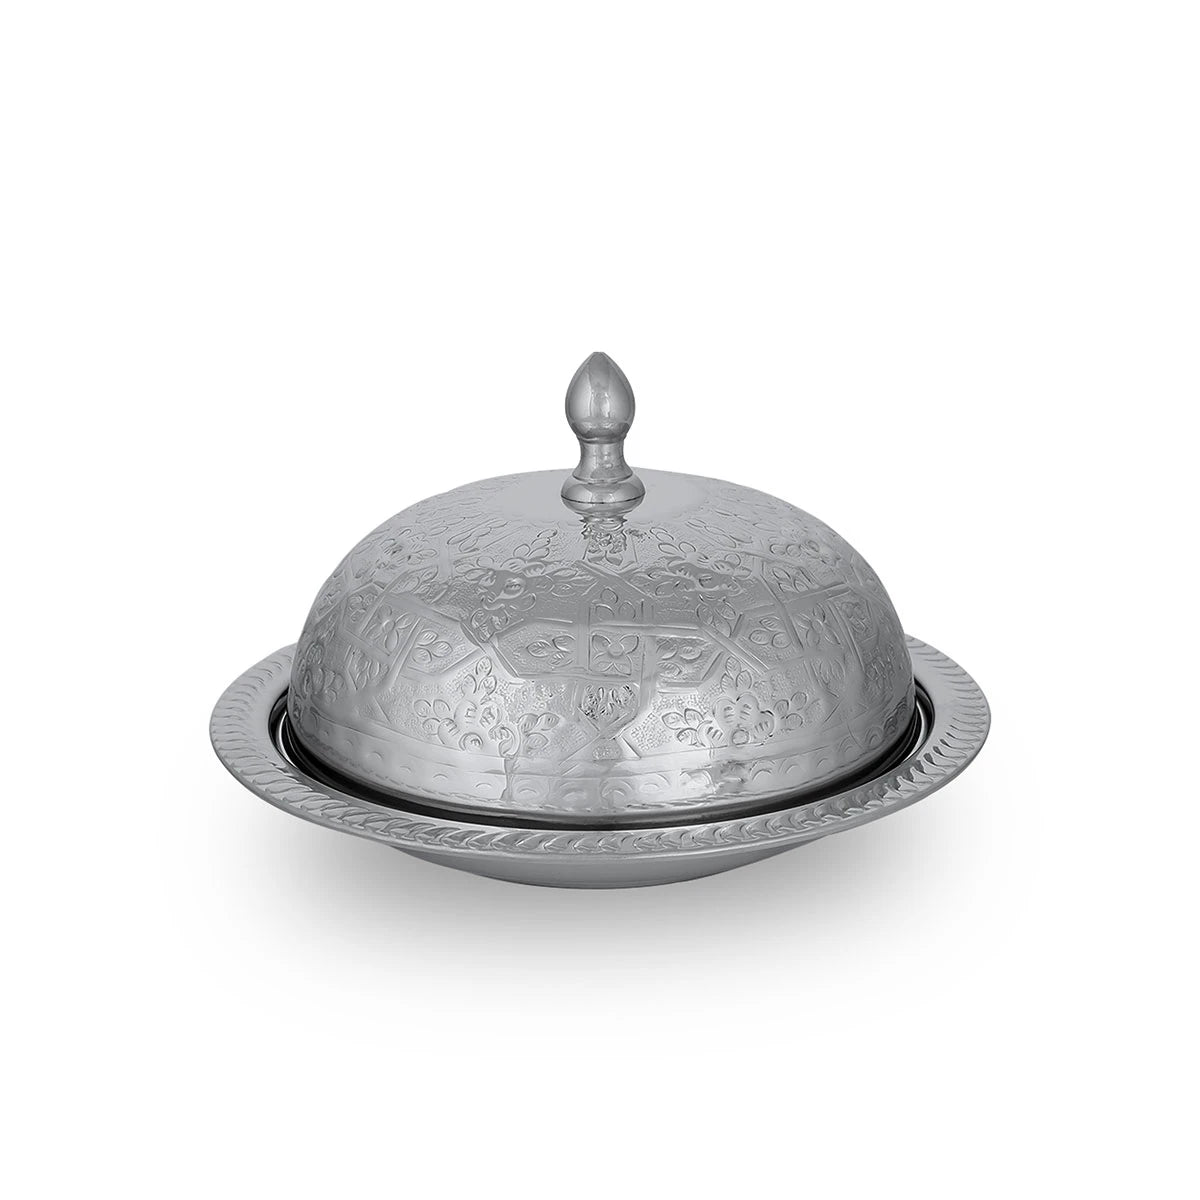 Front View of Ornated Brass Tagine